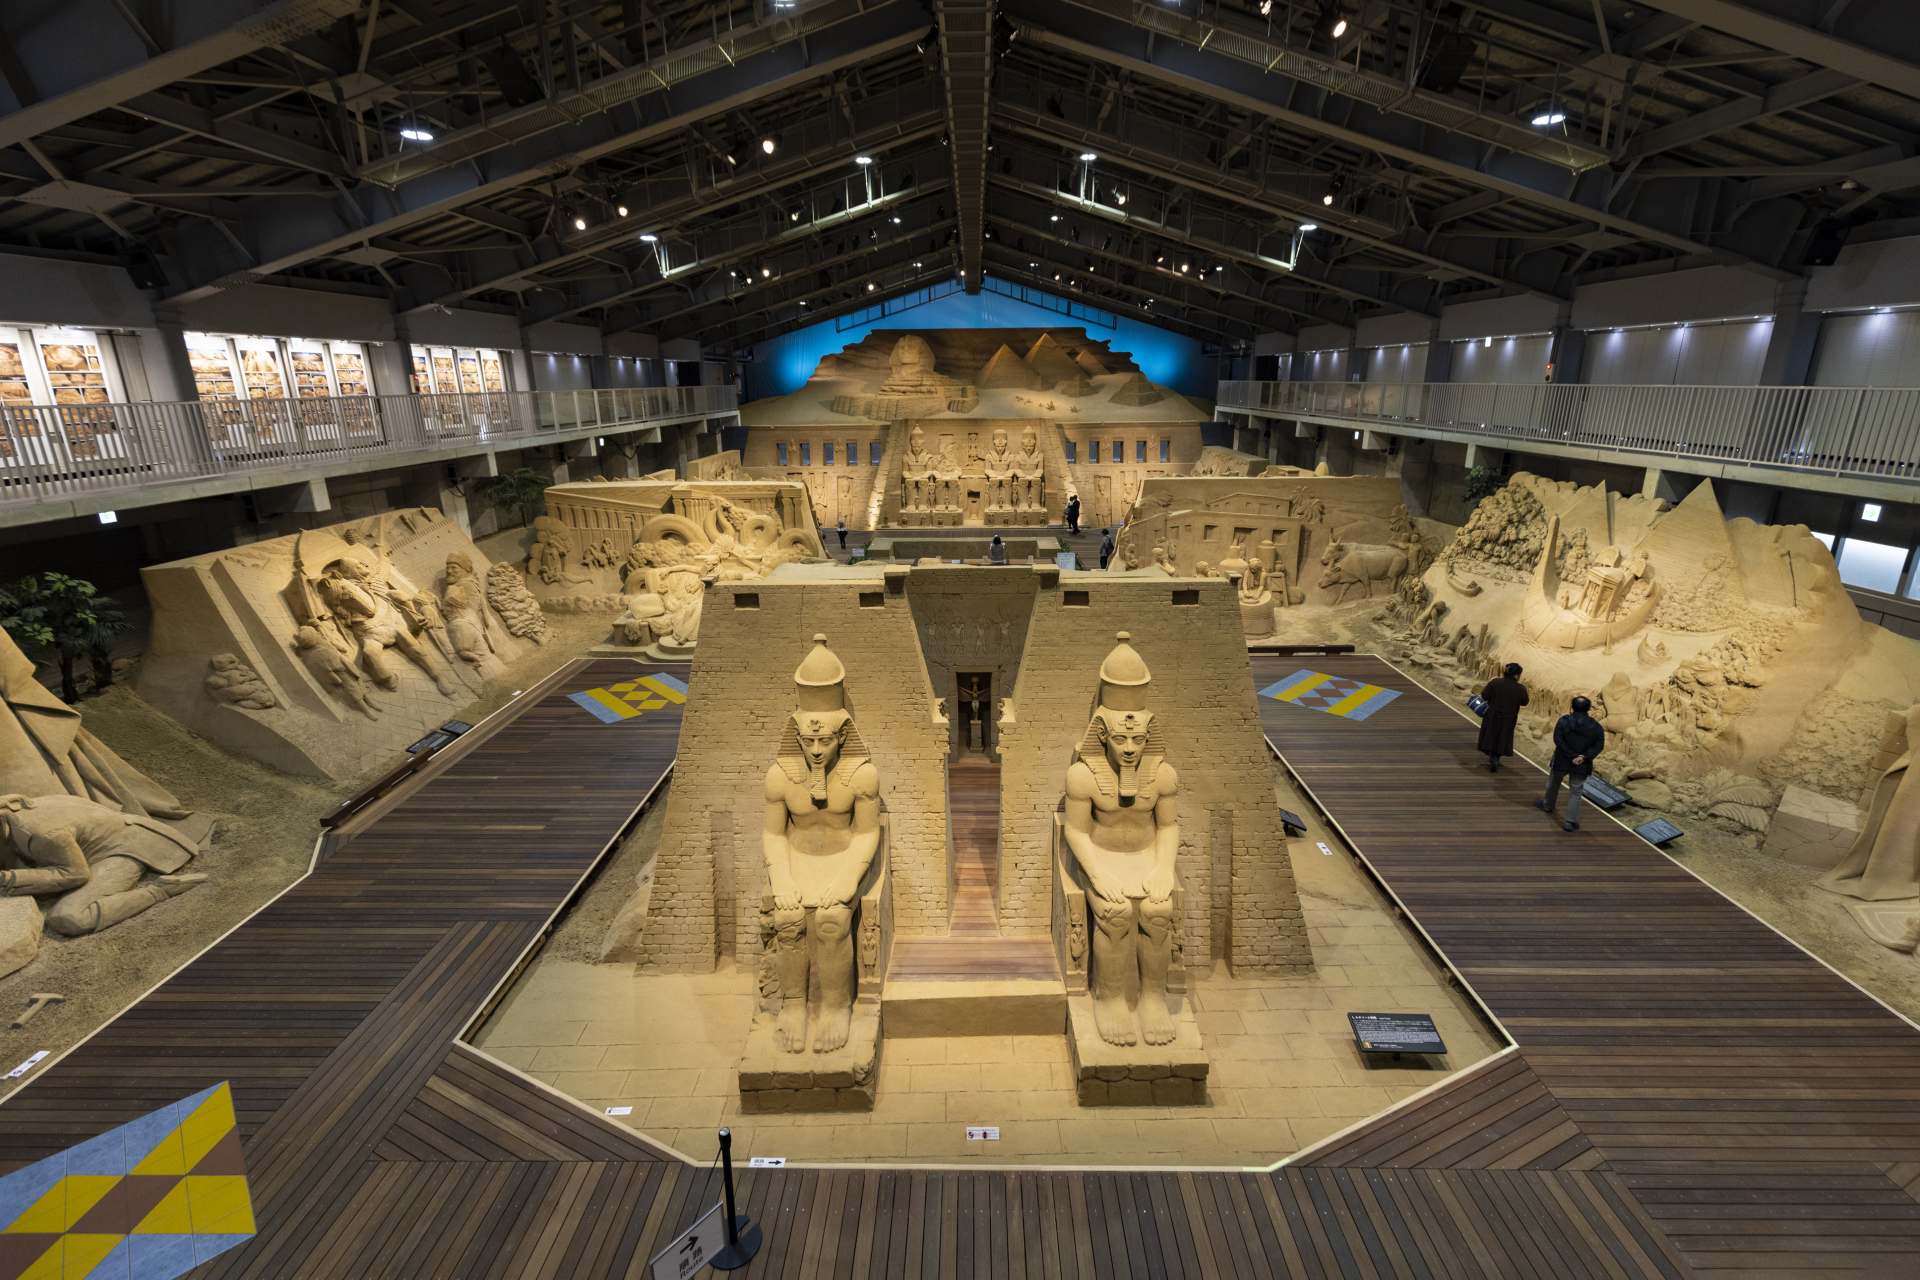 The Sand Museum takes visitors back in time to Ancient Egypt.